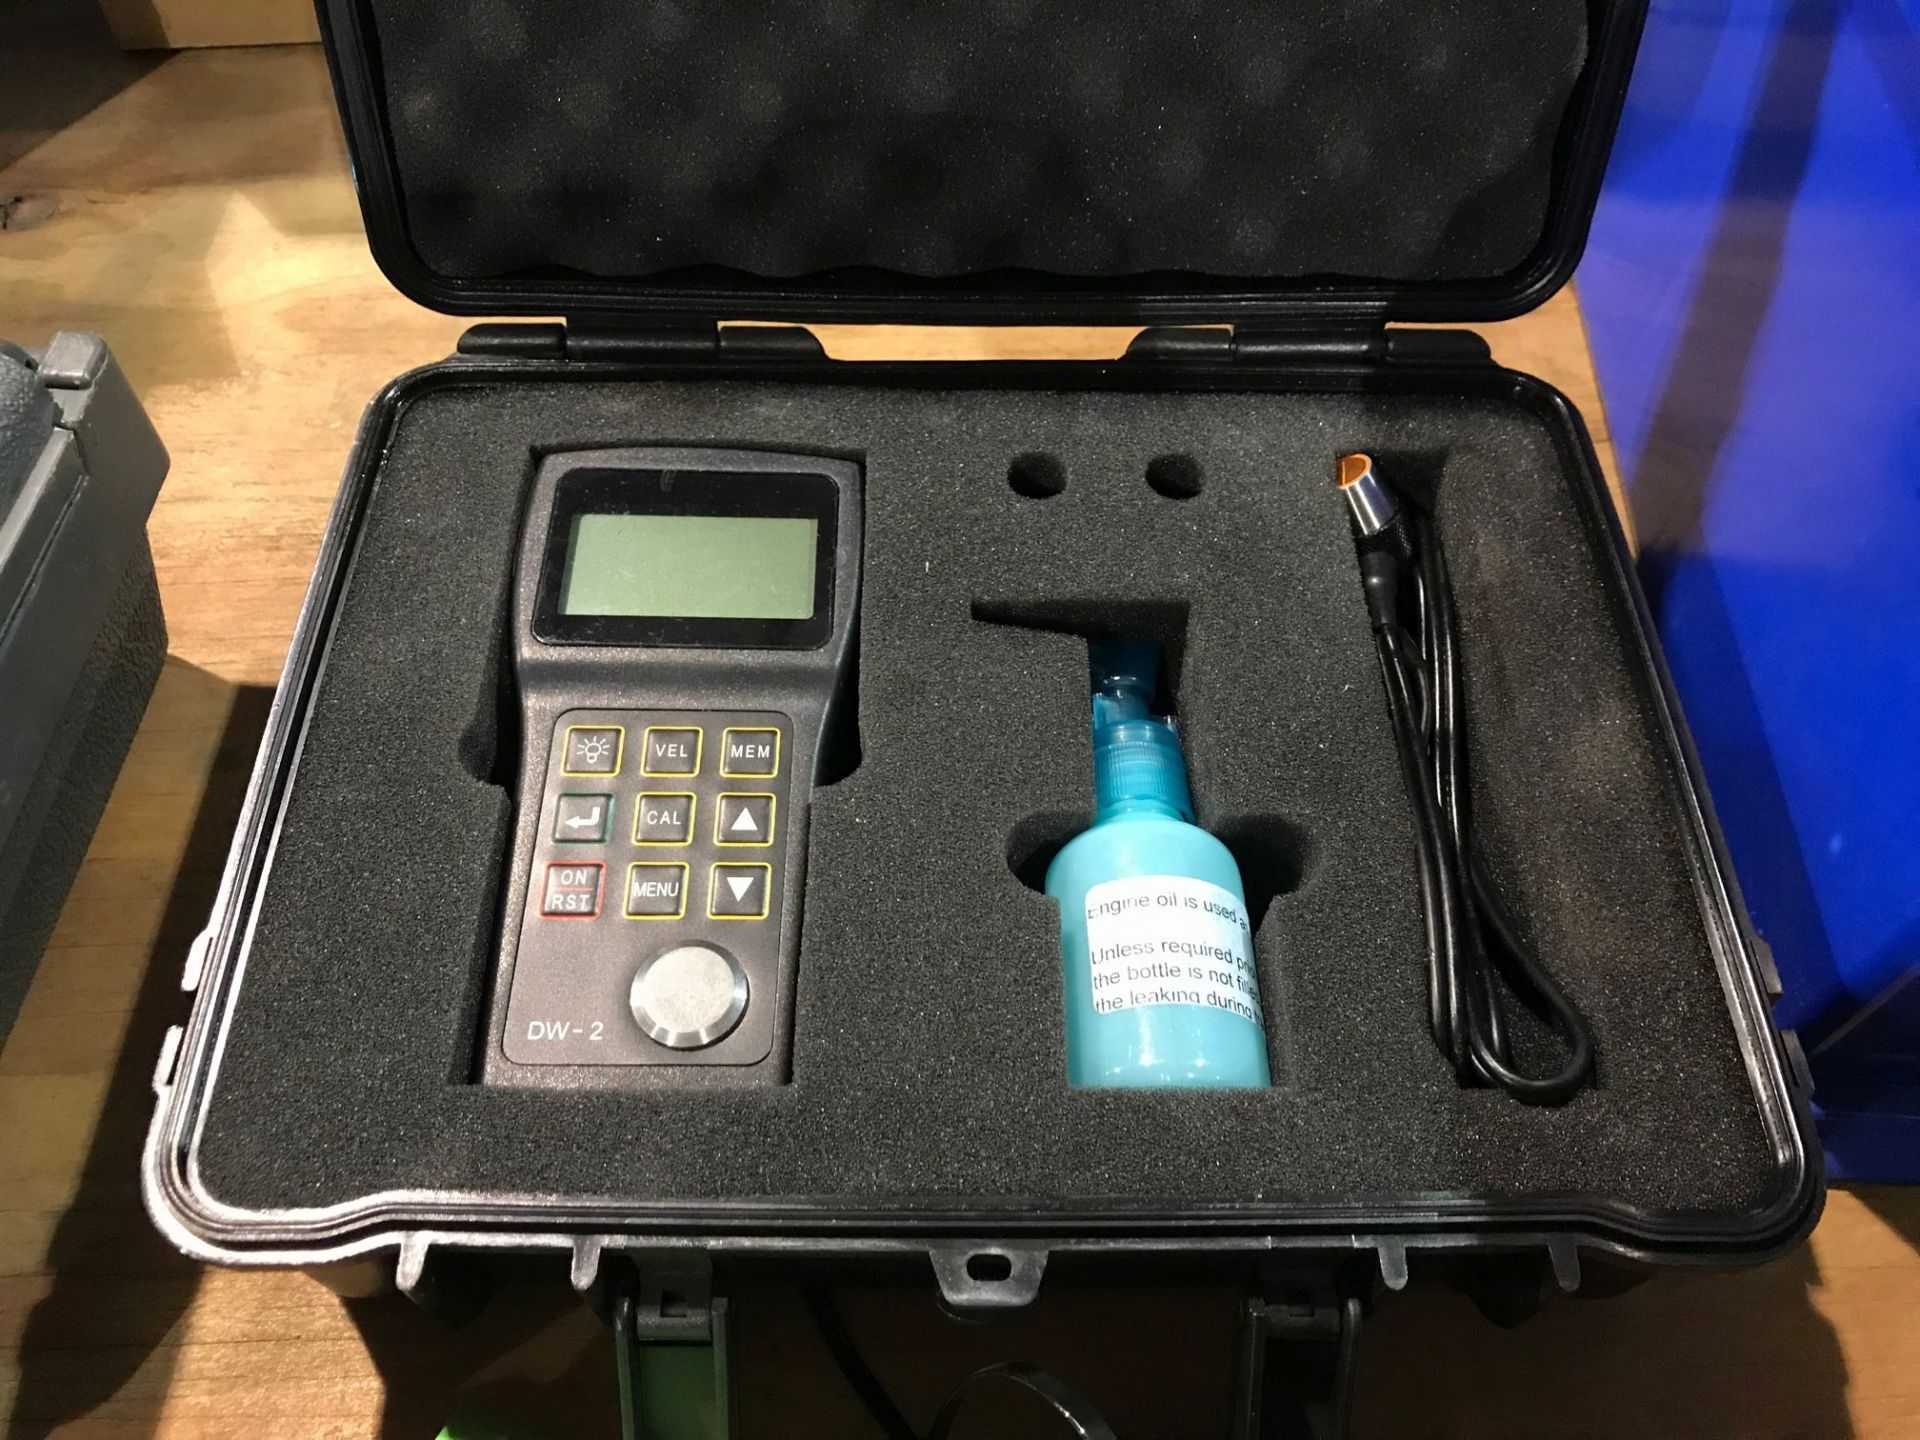 (LOT) STARRETT MODEL 3811A PORTABLE HARDNESS TESTER AND DIGIWORK DW2 ULTRASONIC THICKNESS GAUGE - Image 3 of 3